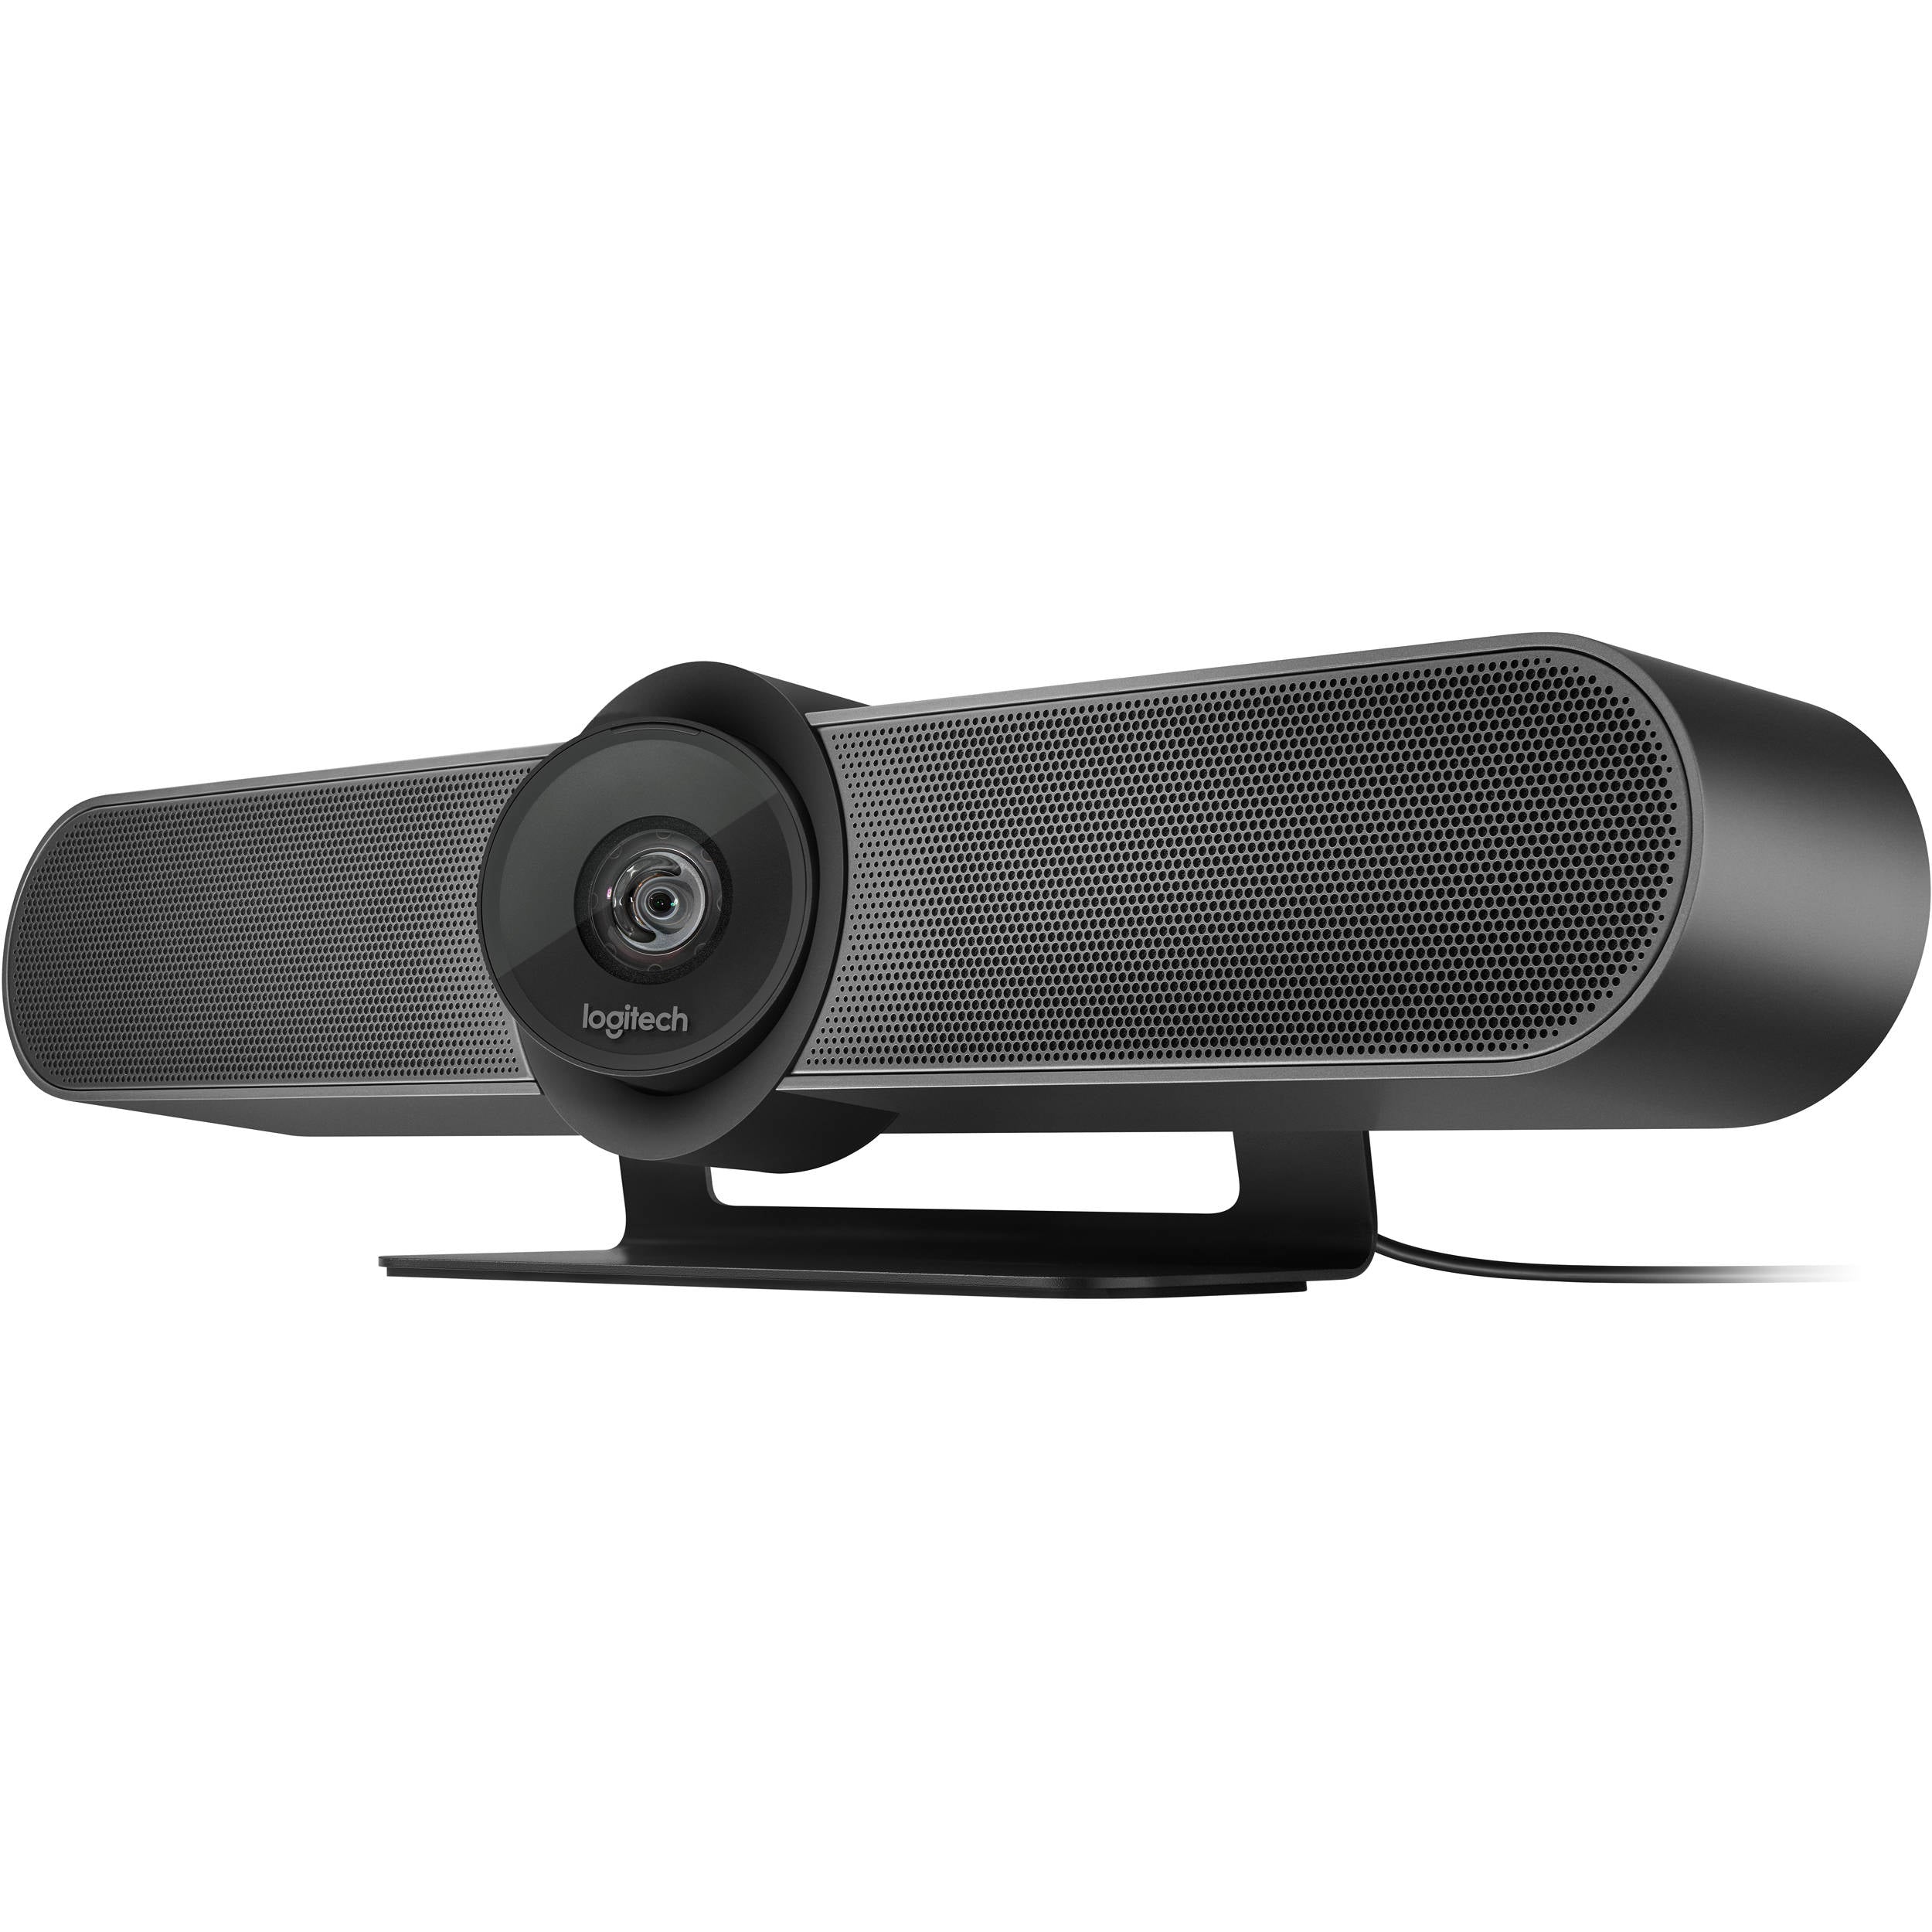 Logitech™ MEETUP 4K ConferenceCam 960-001101 - WINPROMY CONSULTANCY SDN BHD. (1065242-V) All Rights Reserved.